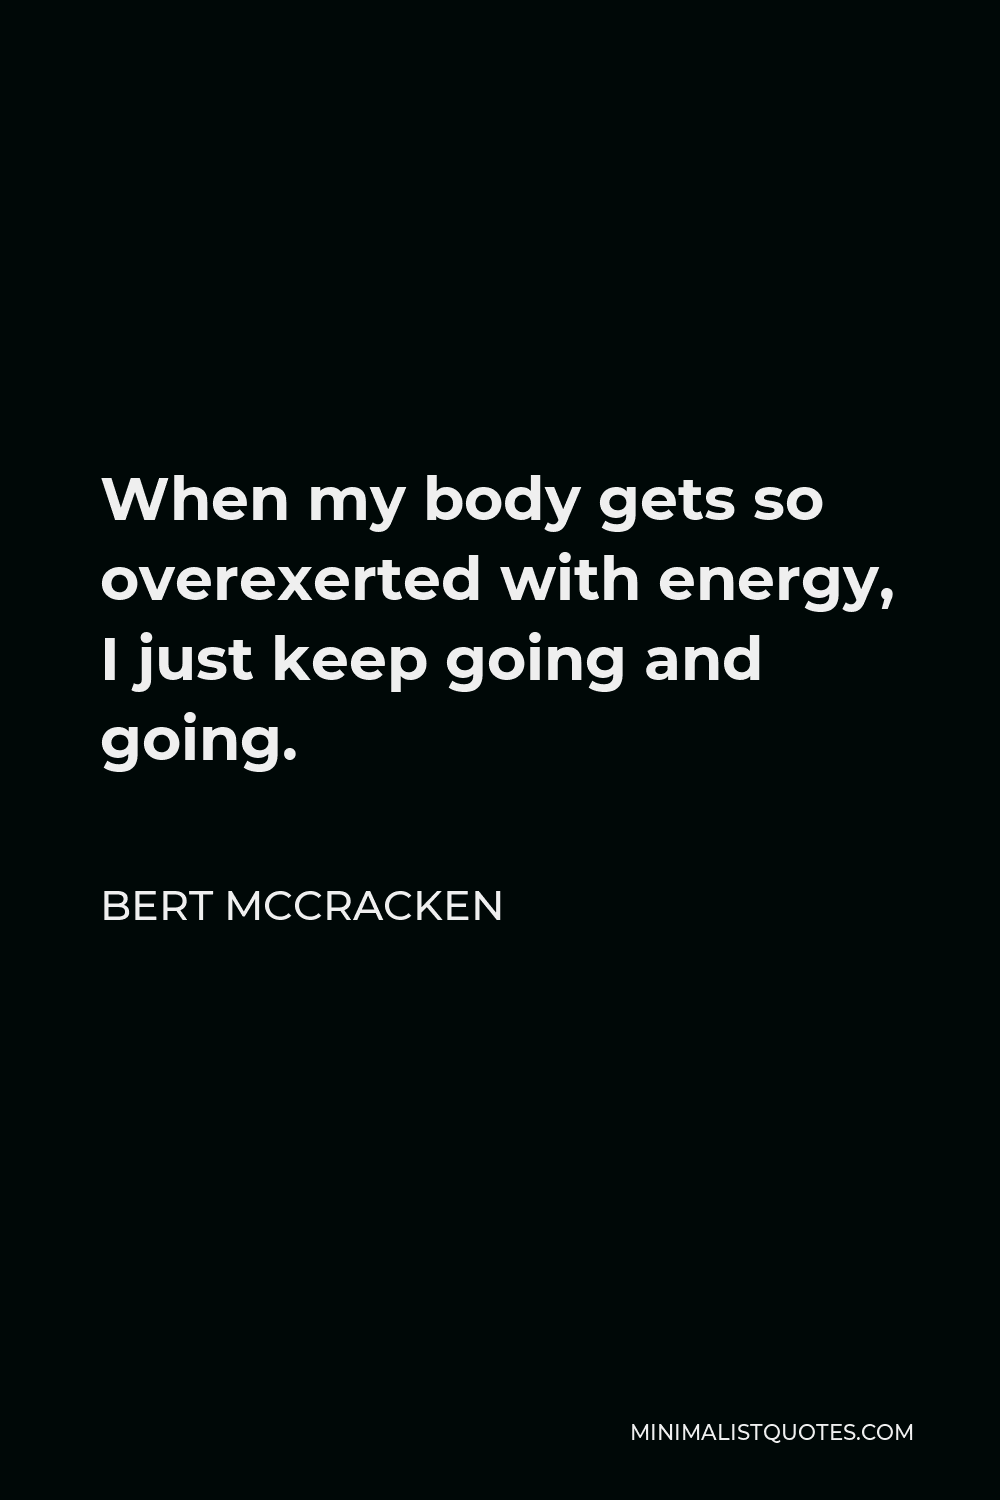 Bert McCracken Quote - When my body gets so overexerted with energy, I just keep going and going.